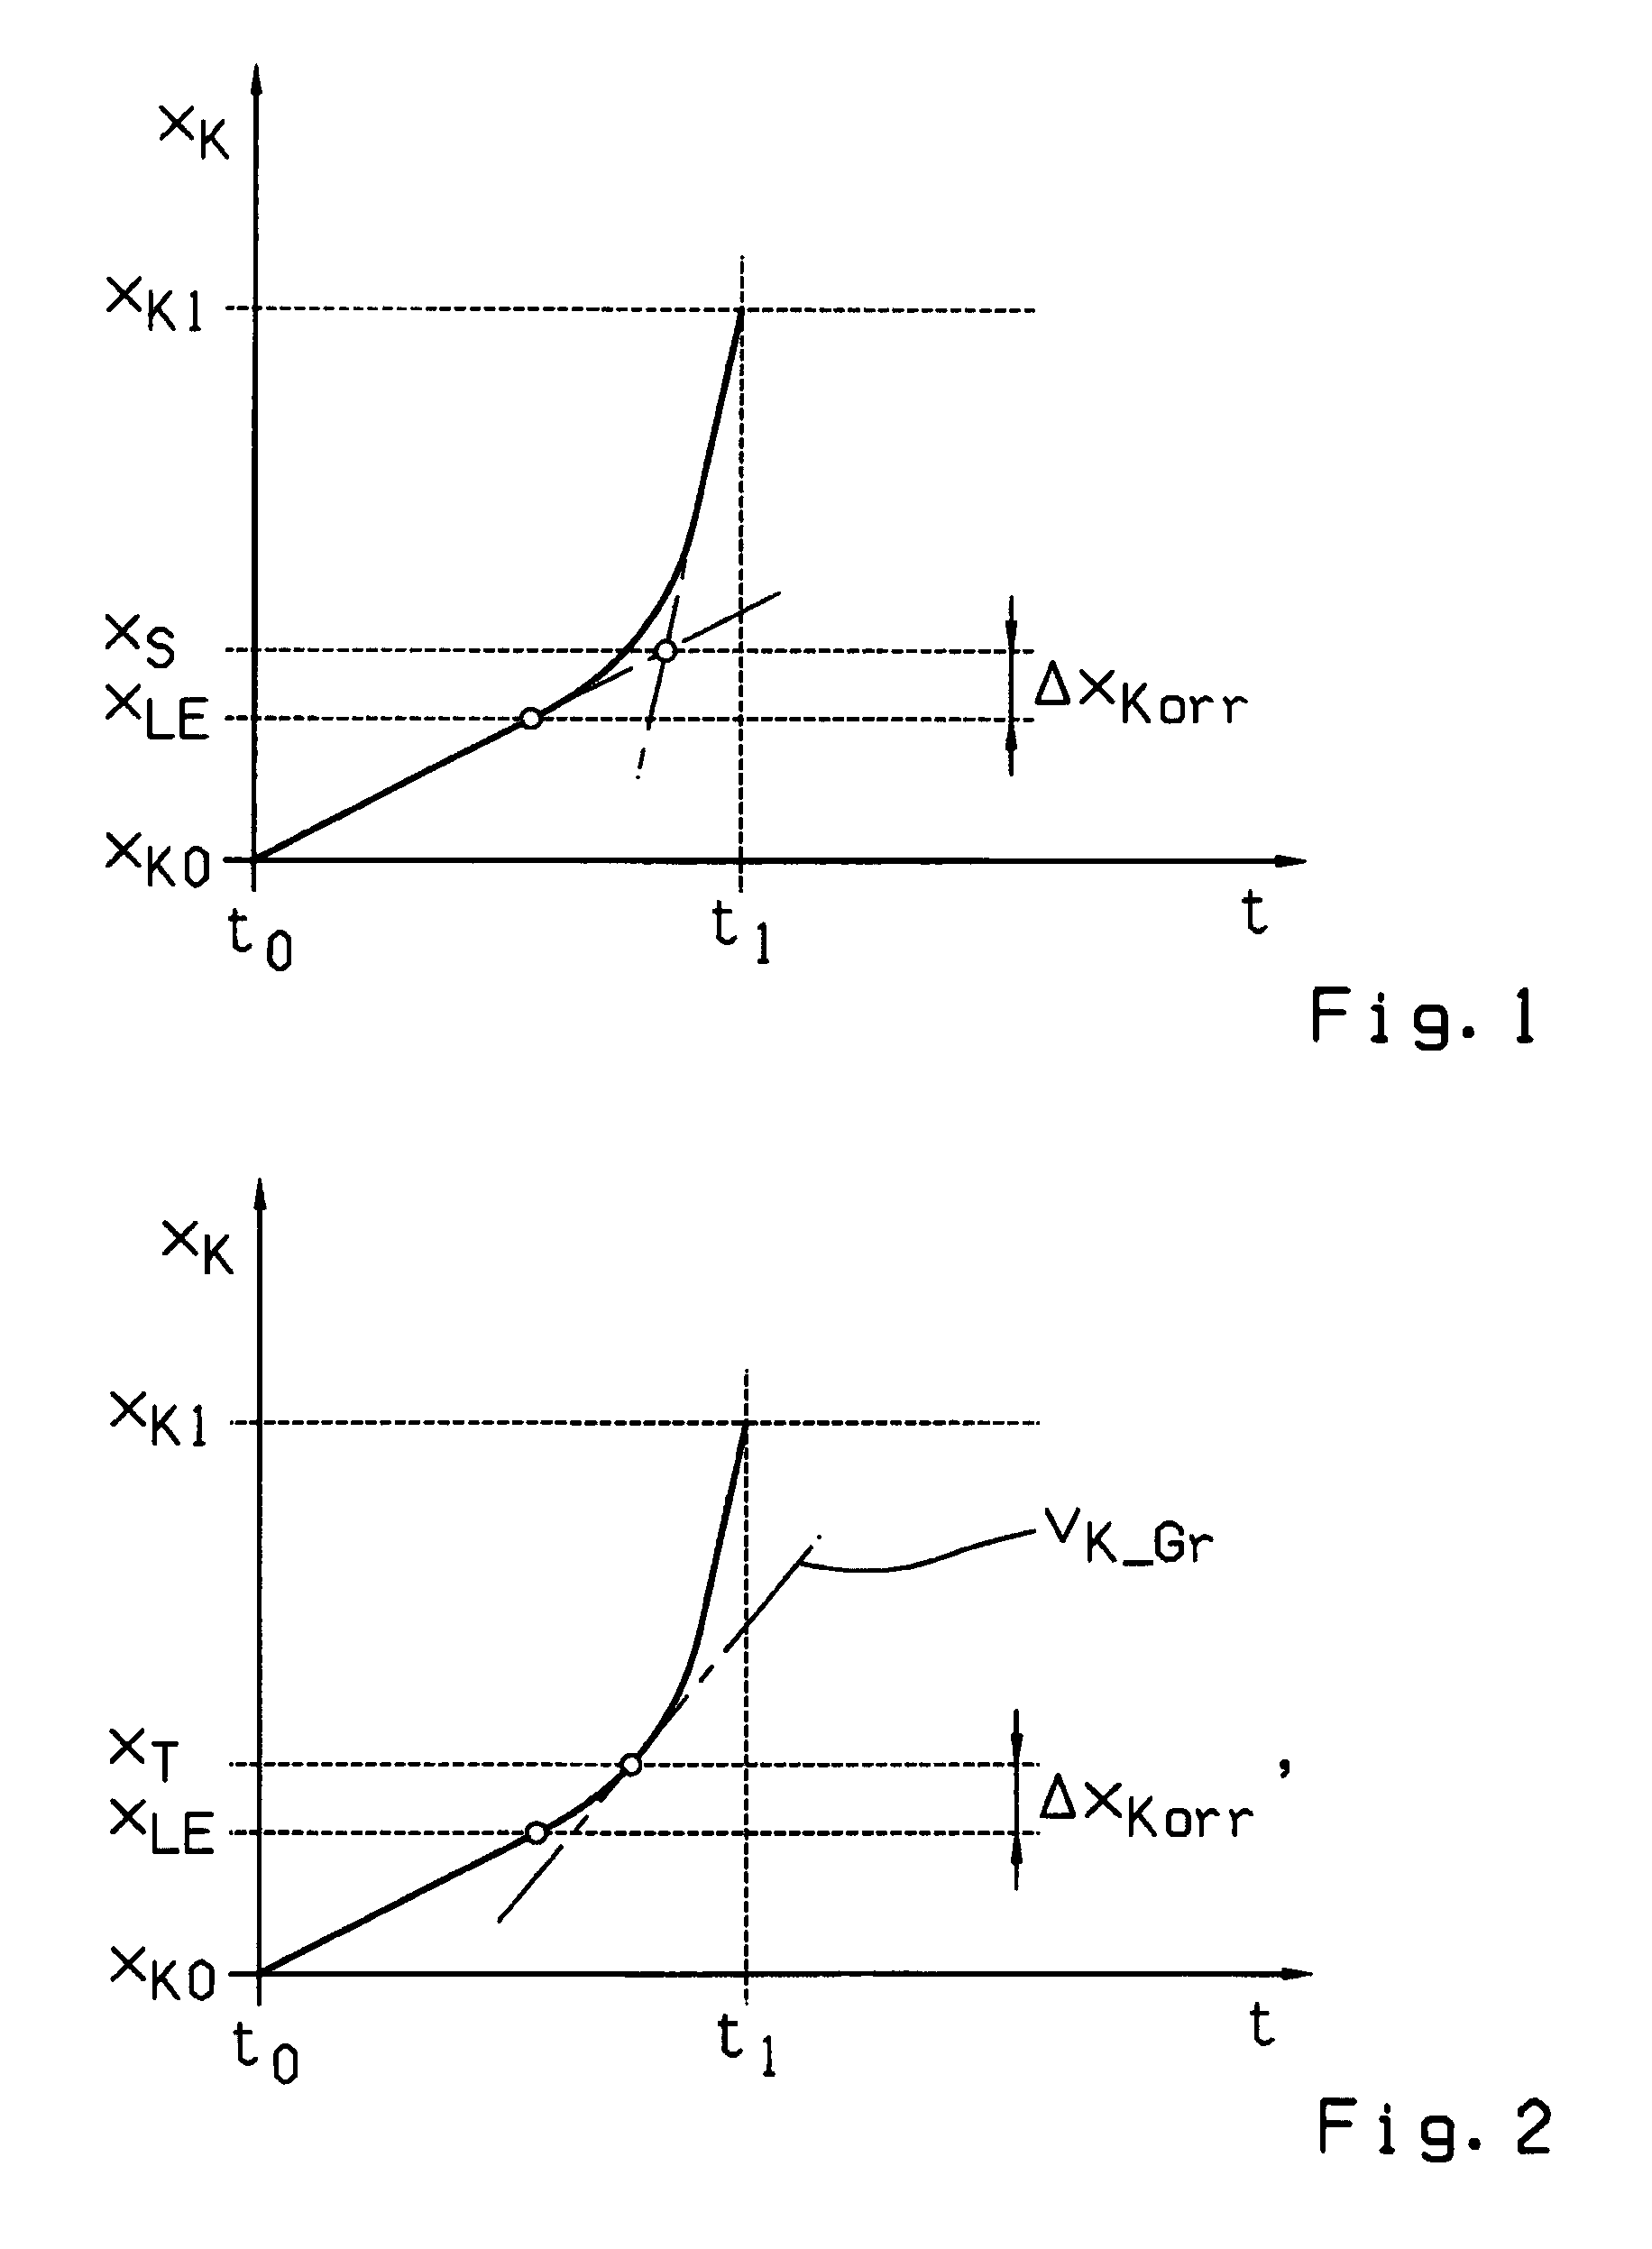 Method for controlling an automated friction clutch